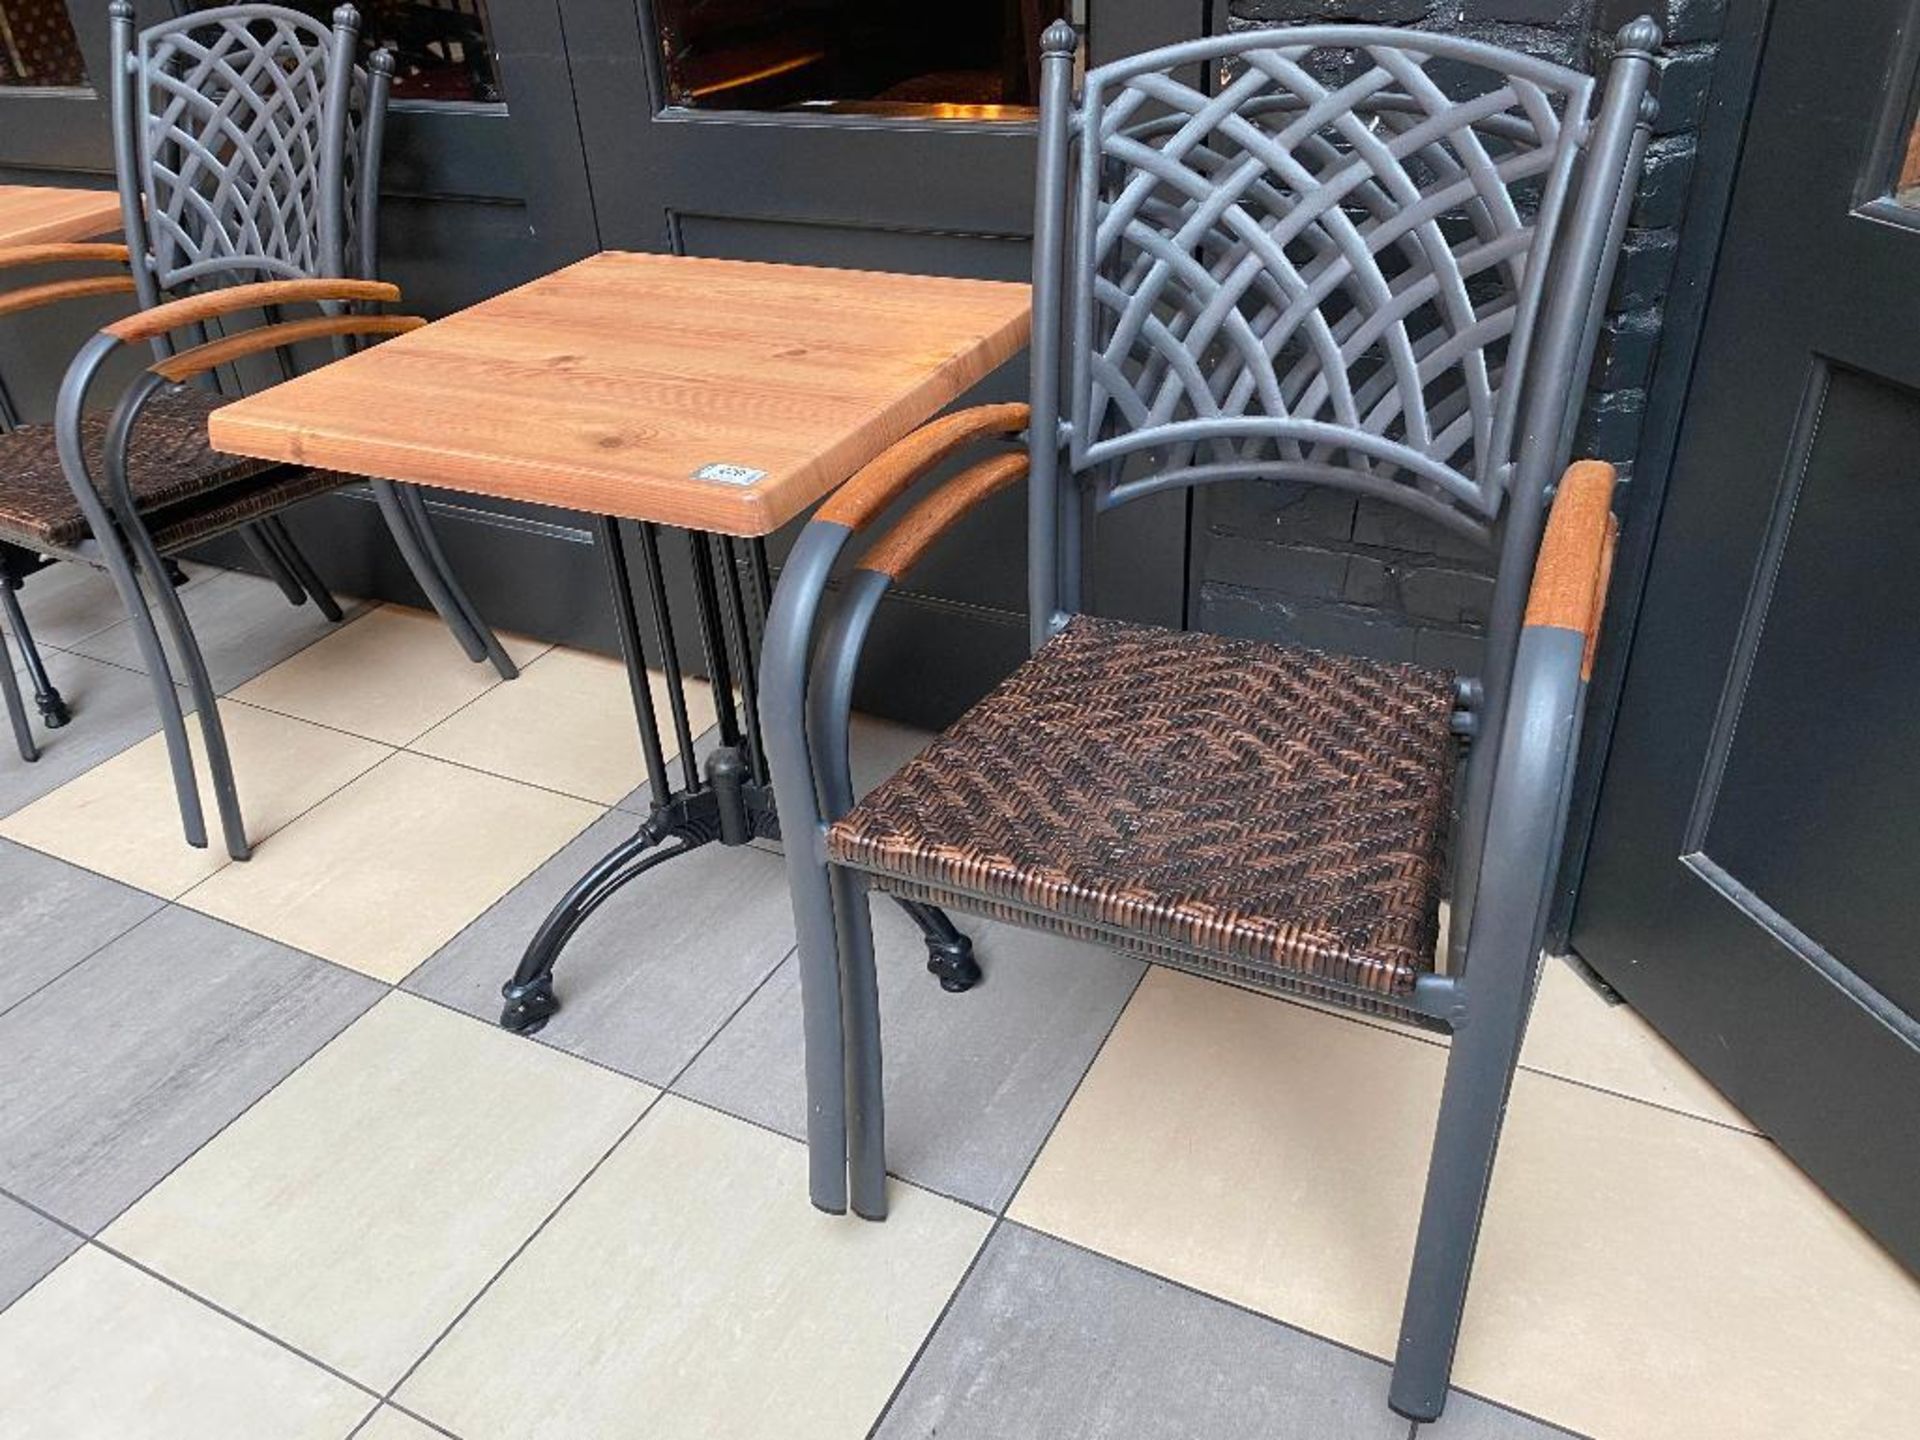 TOPALIT 23" X 23" PATIO TABLE WITH 2 CHAIRS